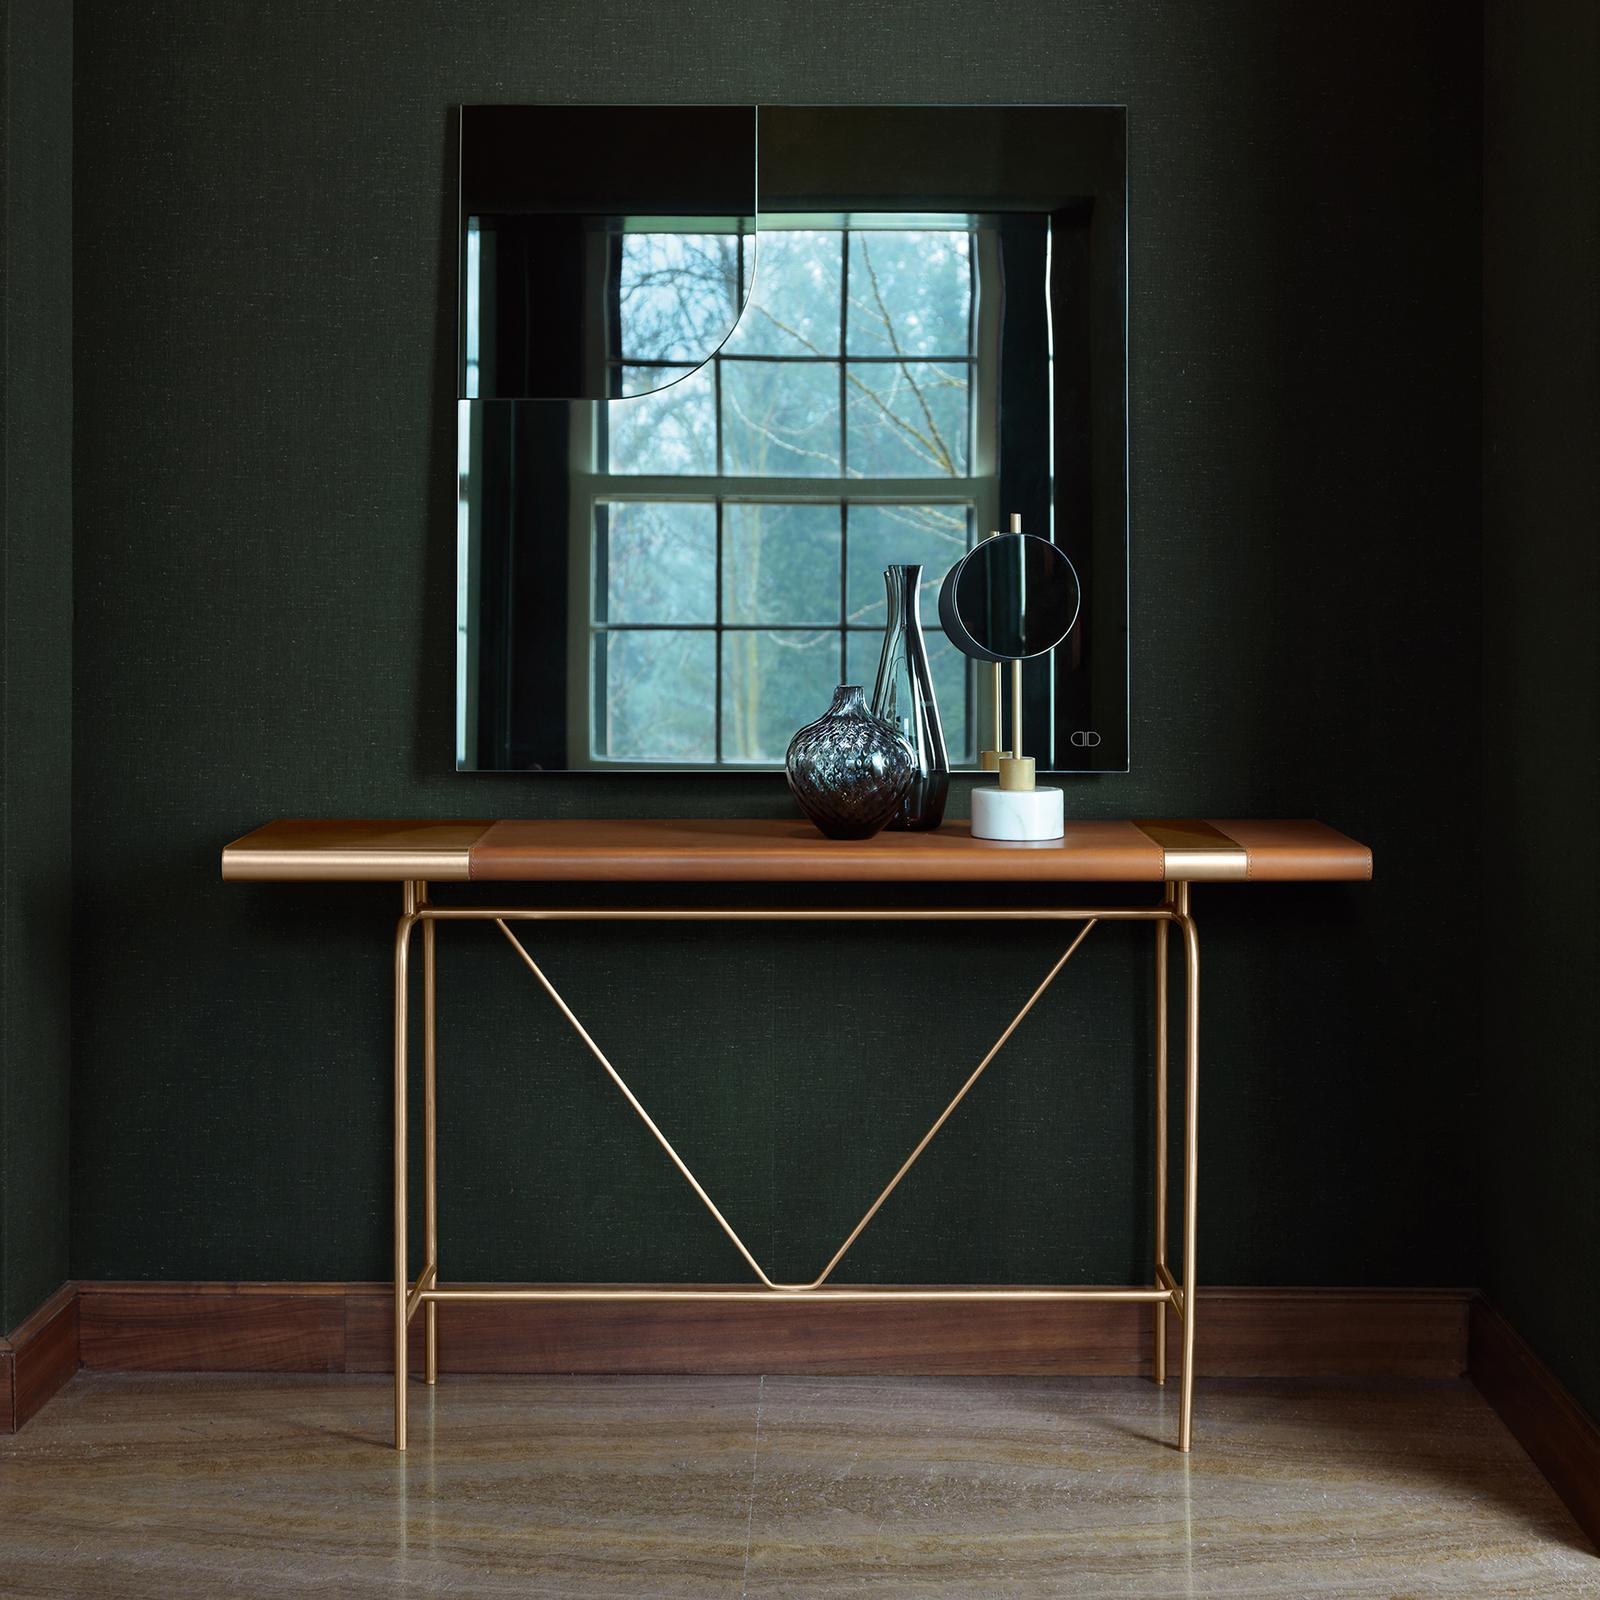 Overwhelming, amazing, variable with every breath taking life as a play. Misia console by Daytona is structured with tubular brass frame, plywood top lined with brass and leather lamina. Conceived and designed by the famous designer Leonardo